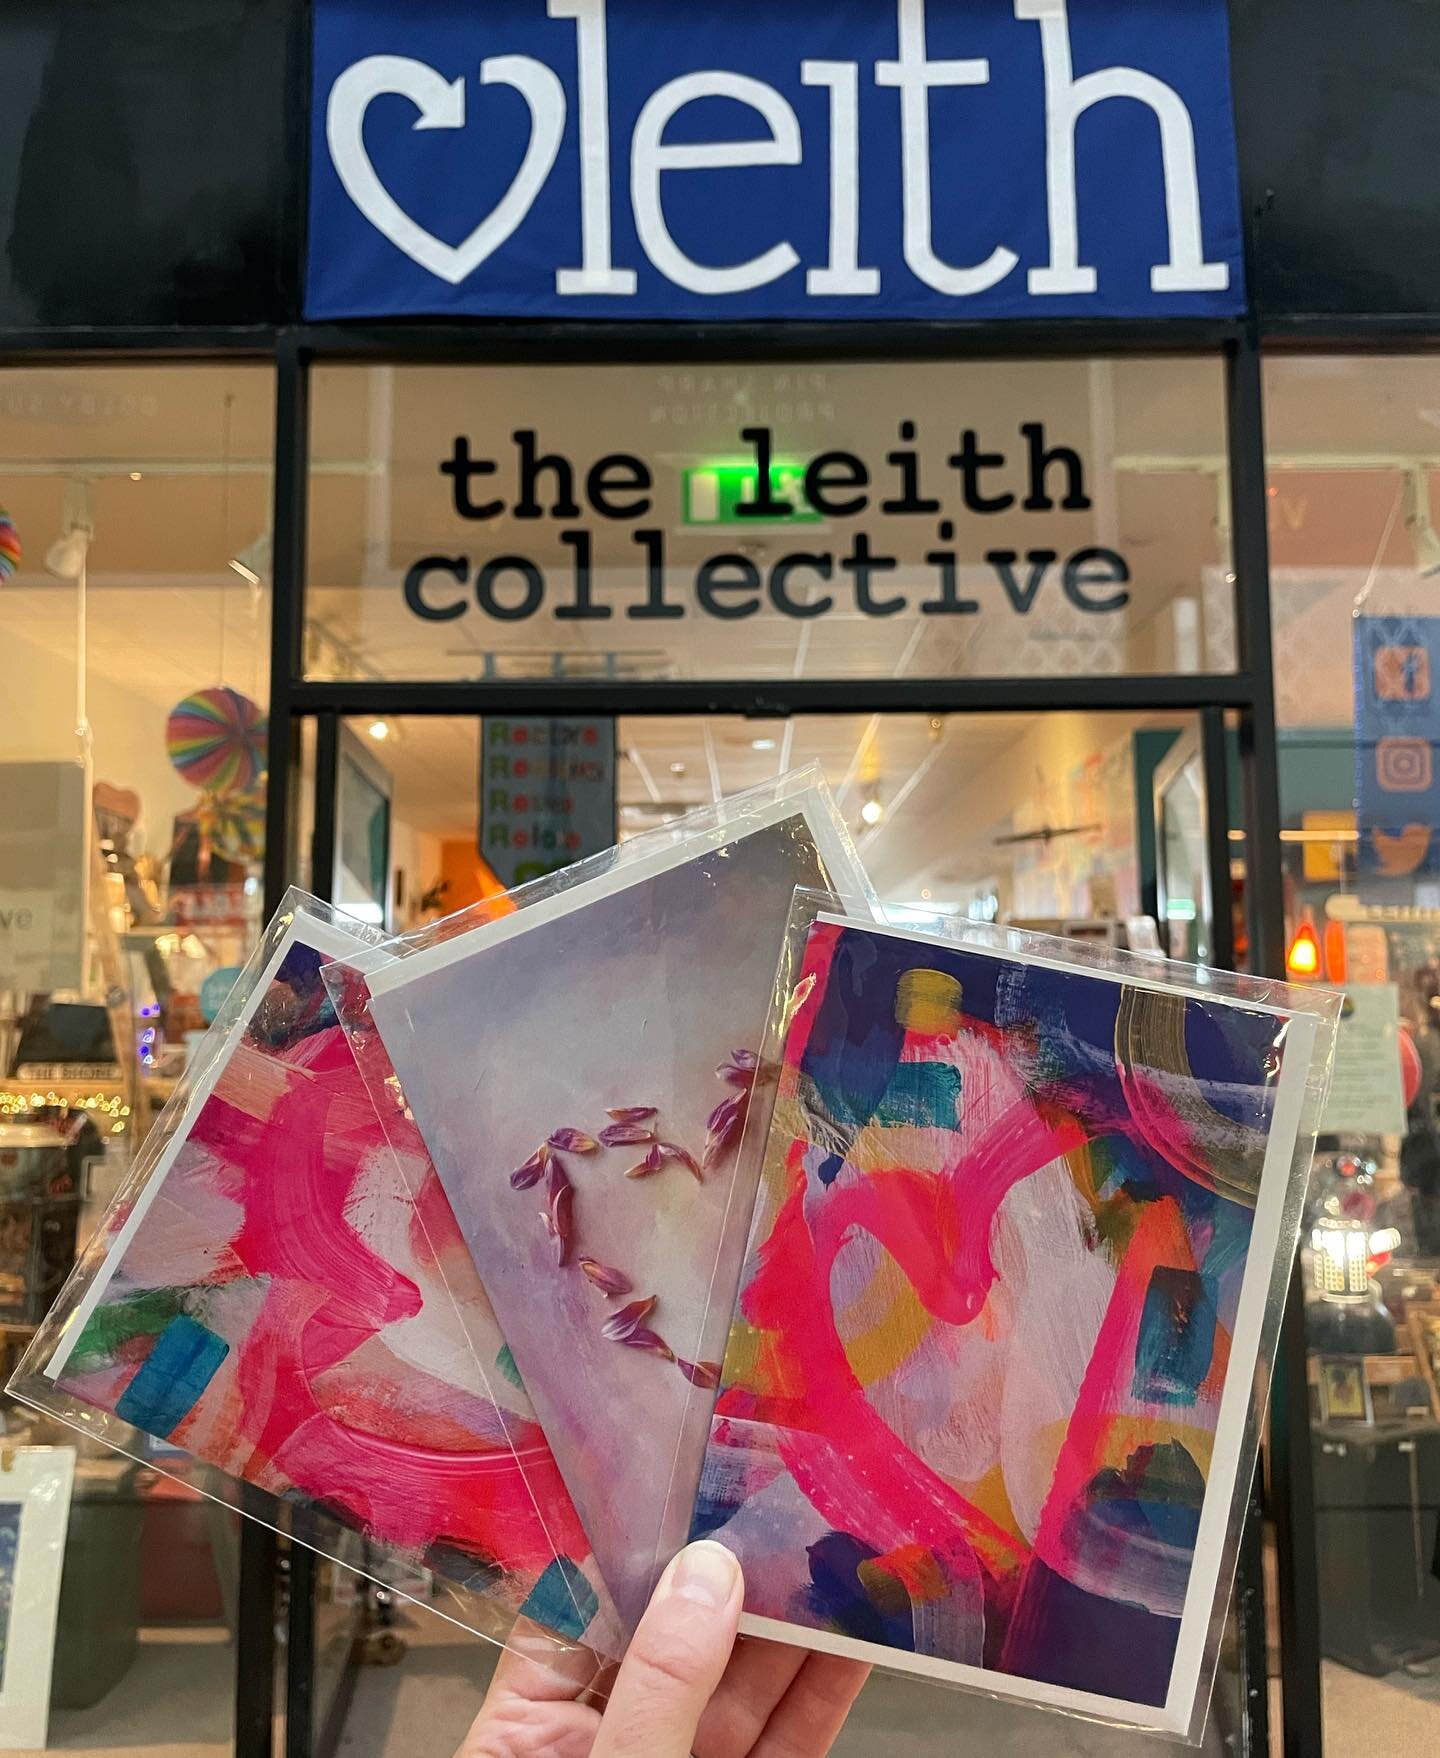 Live, laugh, love, Leith! 😉
A restock of these love themed cards among others at @the_leith_collective this week, in time for Valentine&rsquo;s Day. 💕

#theleithcollective #oceanterminal #indieshoplove #loveleith #reducereuserecycle #smallbusinesse